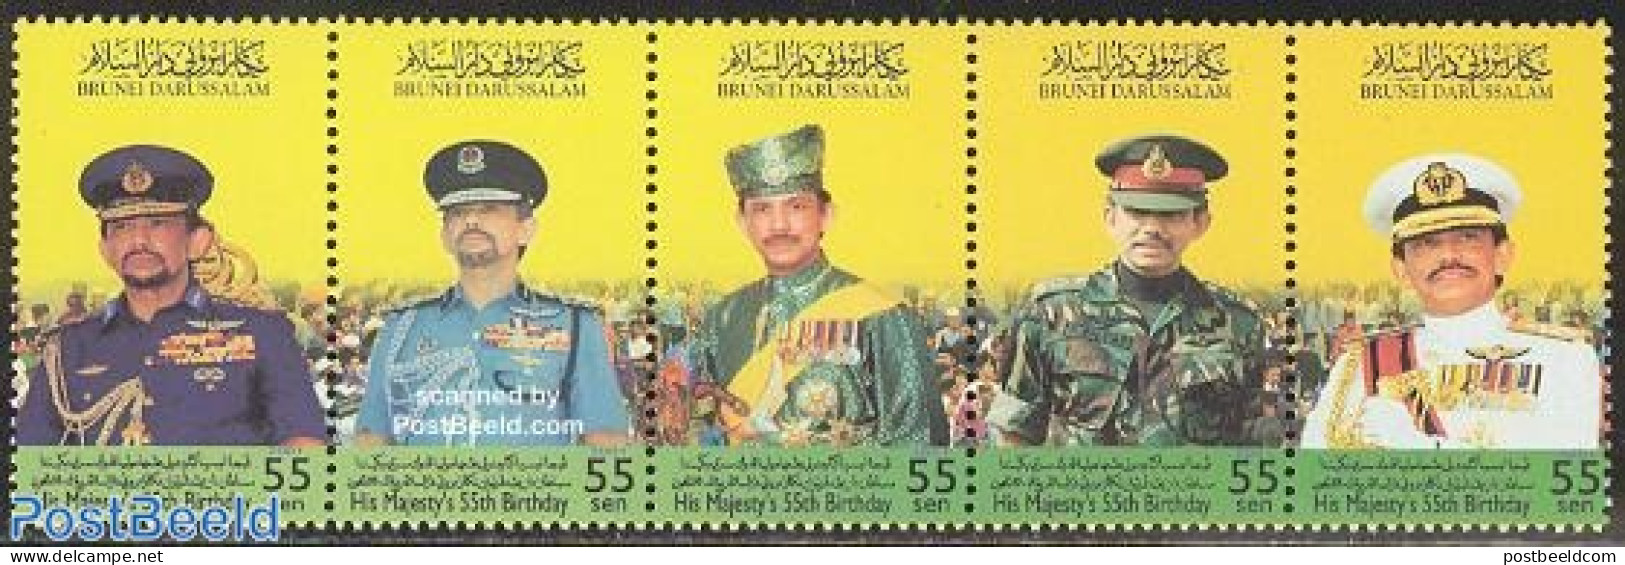 Brunei 2001 King 55th Birthday 5v [::::], Mint NH, History - Various - Kings & Queens (Royalty) - Uniforms - Familles Royales